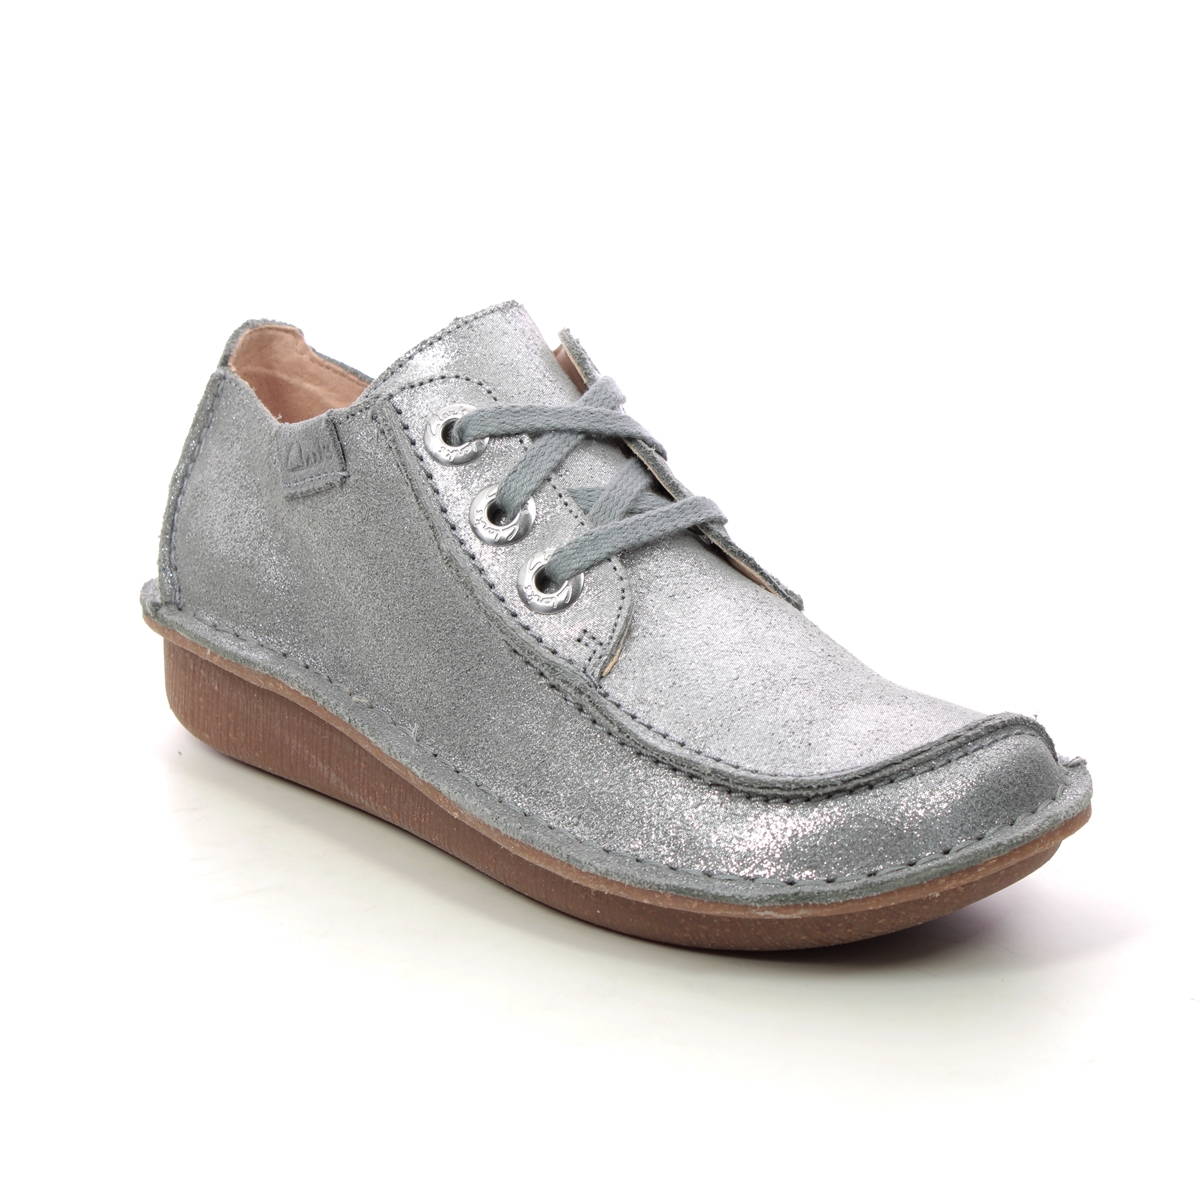 Clarks Funny Dream Silver Glitz Womens lacing shoes 6945-84D in a Plain Leather in Size 6